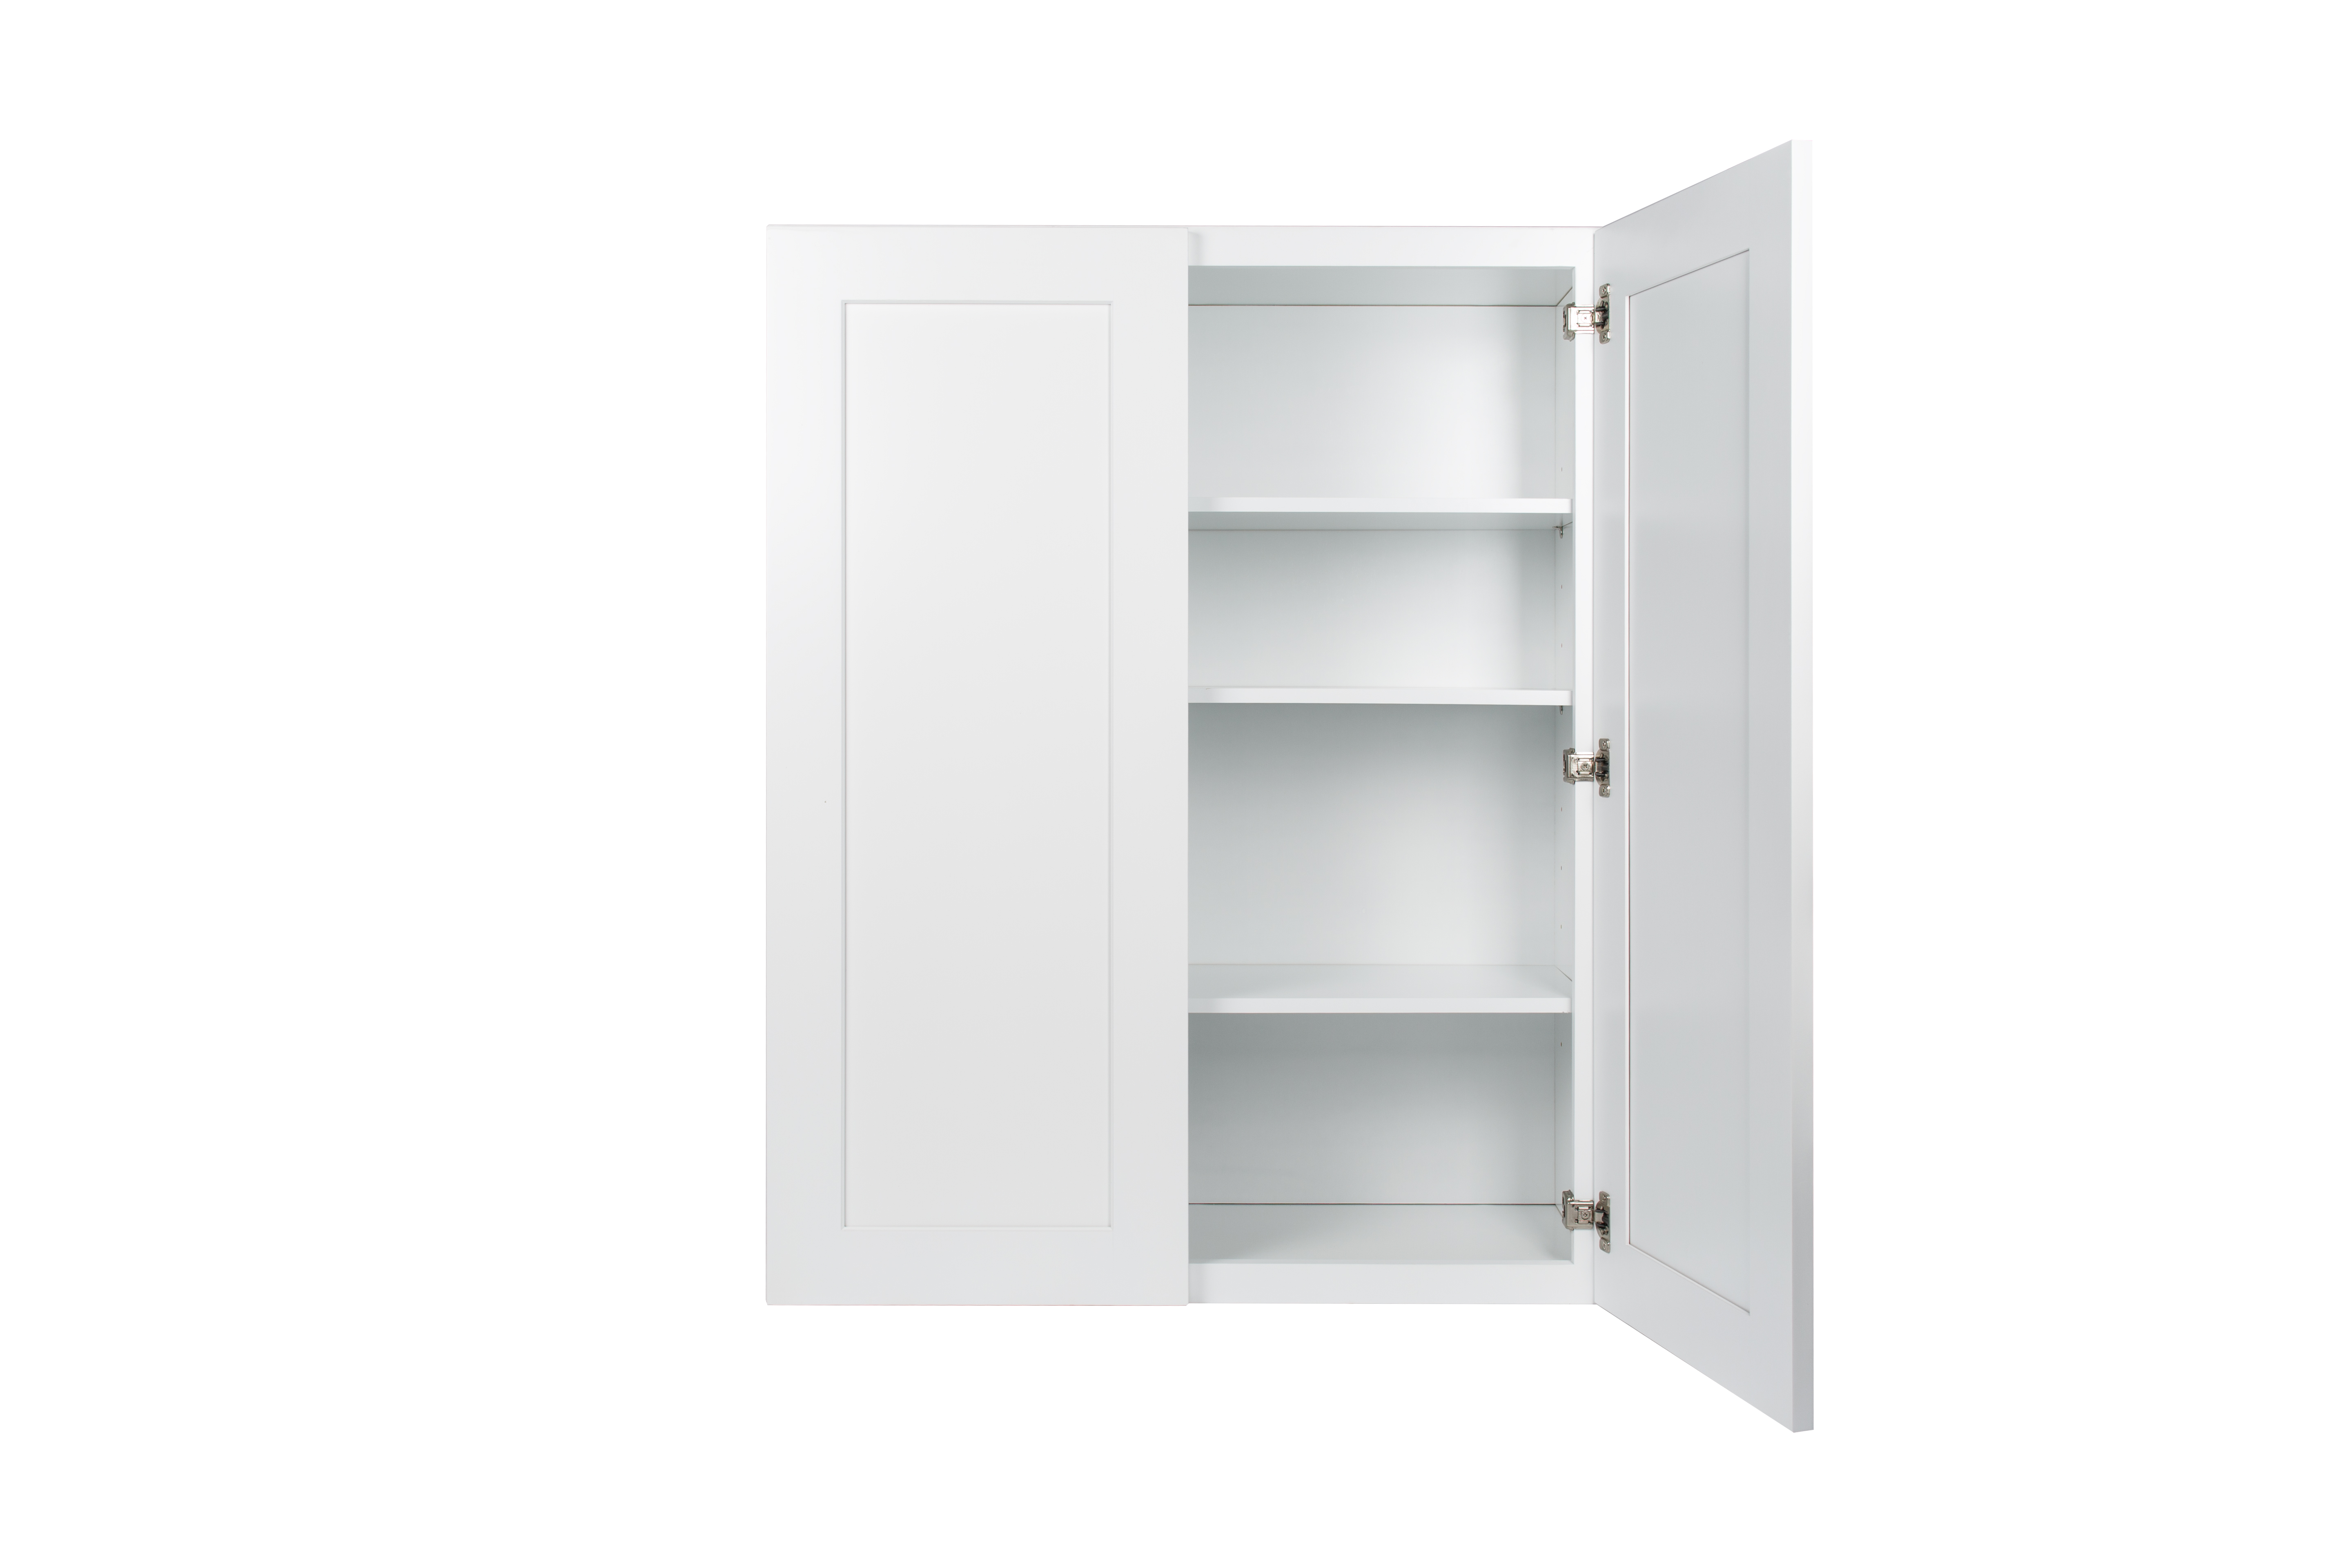 Ready to Assemble 24x36x12 in. Wall Cabinets with 2 Doors and 2 Adjustable Shelves in Shake White